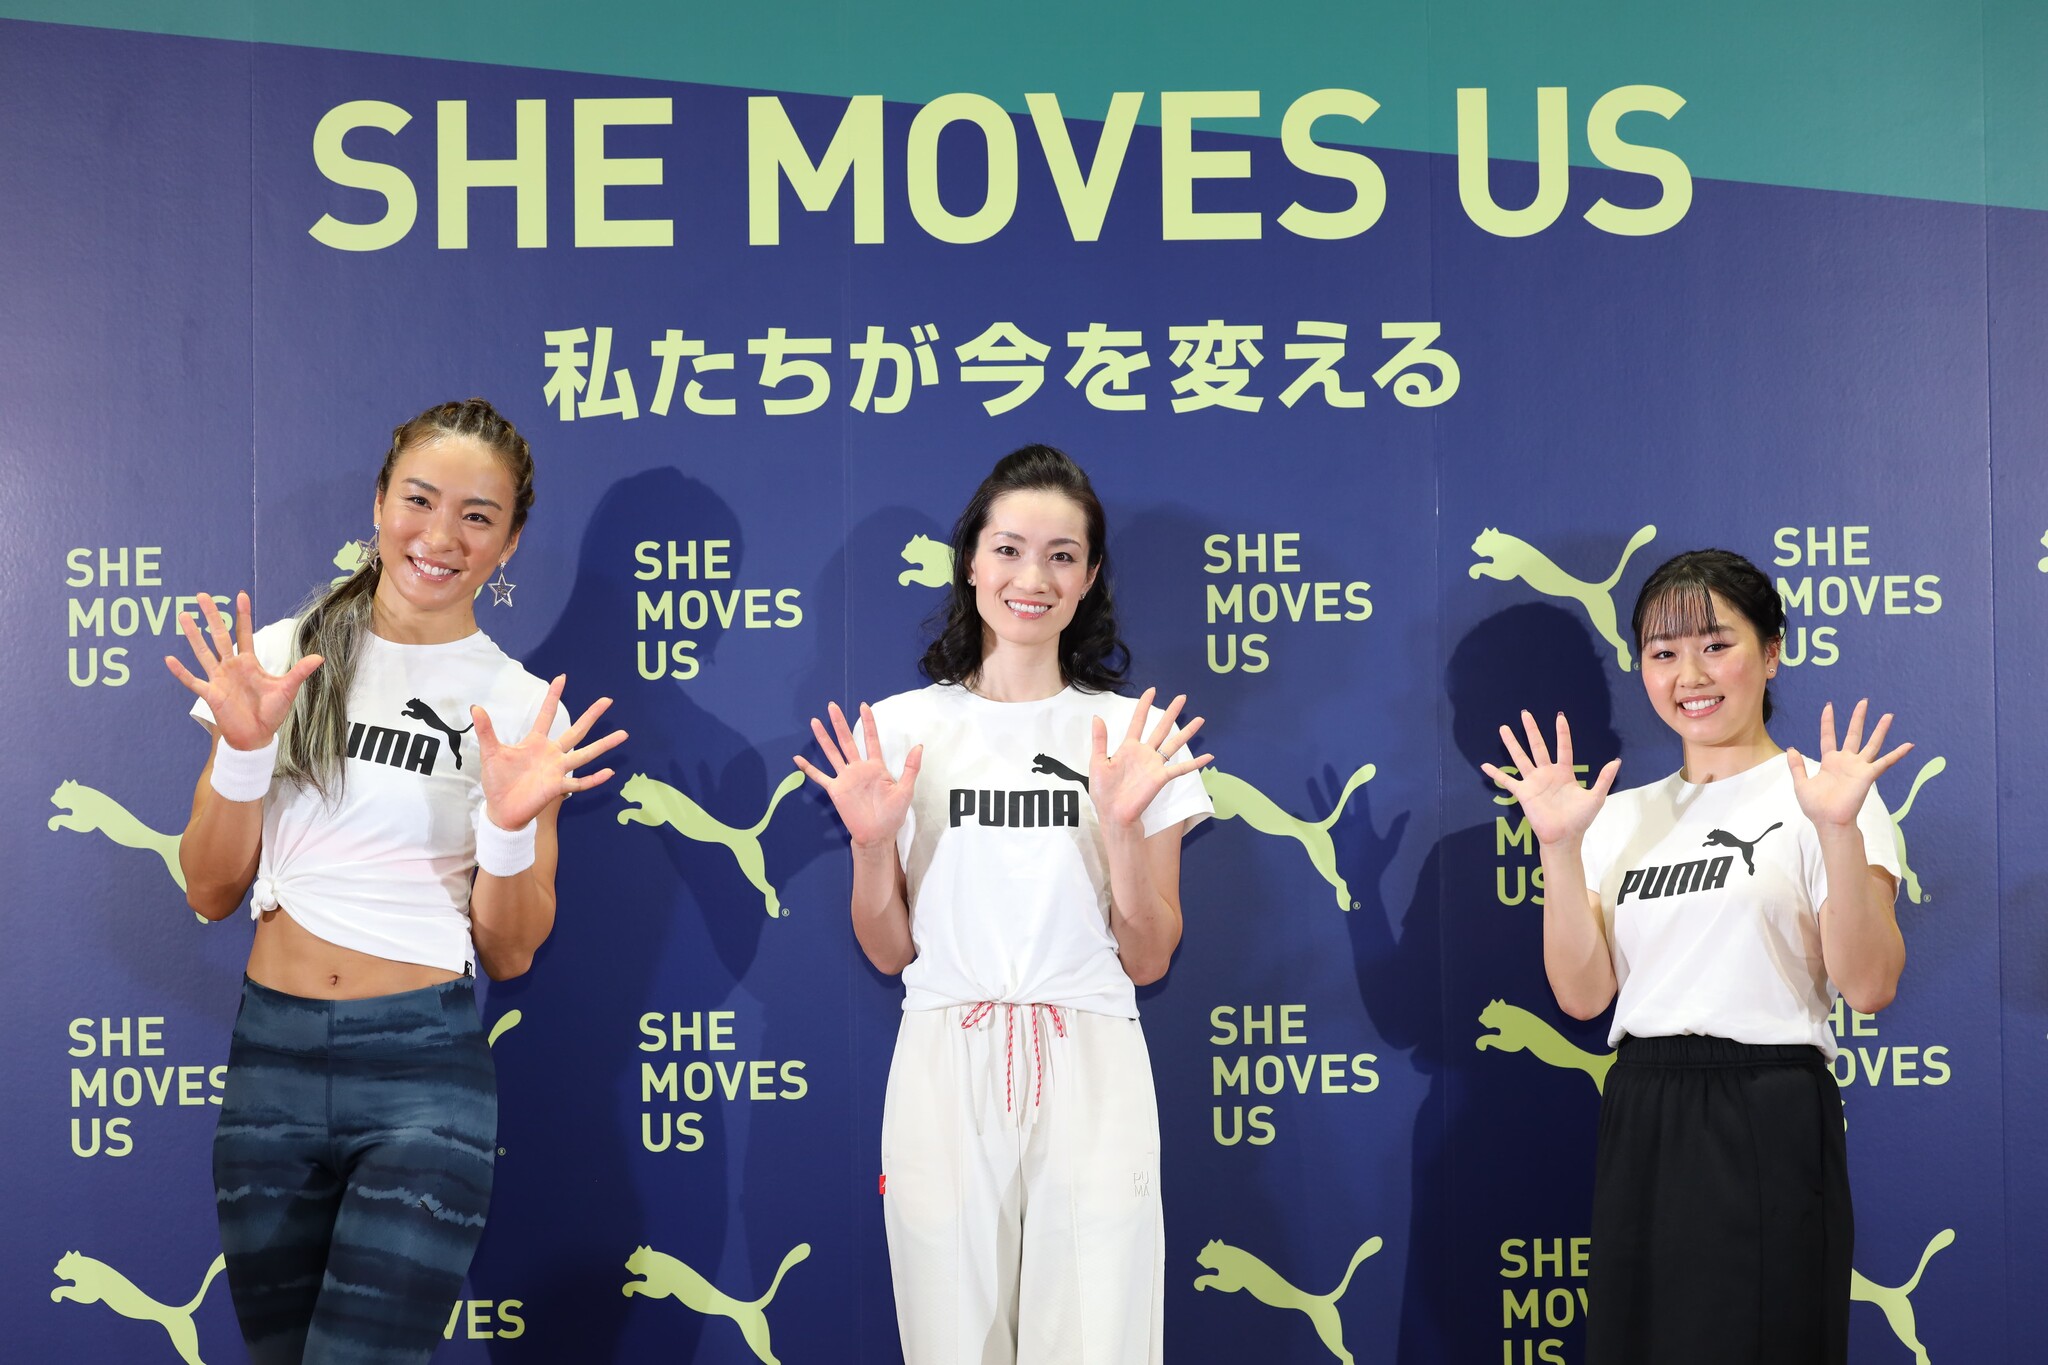 「SHE MOVES US(シー ムーブス アス)〜私たちが今を変える〜」特別課外授業 in 青山学院大学